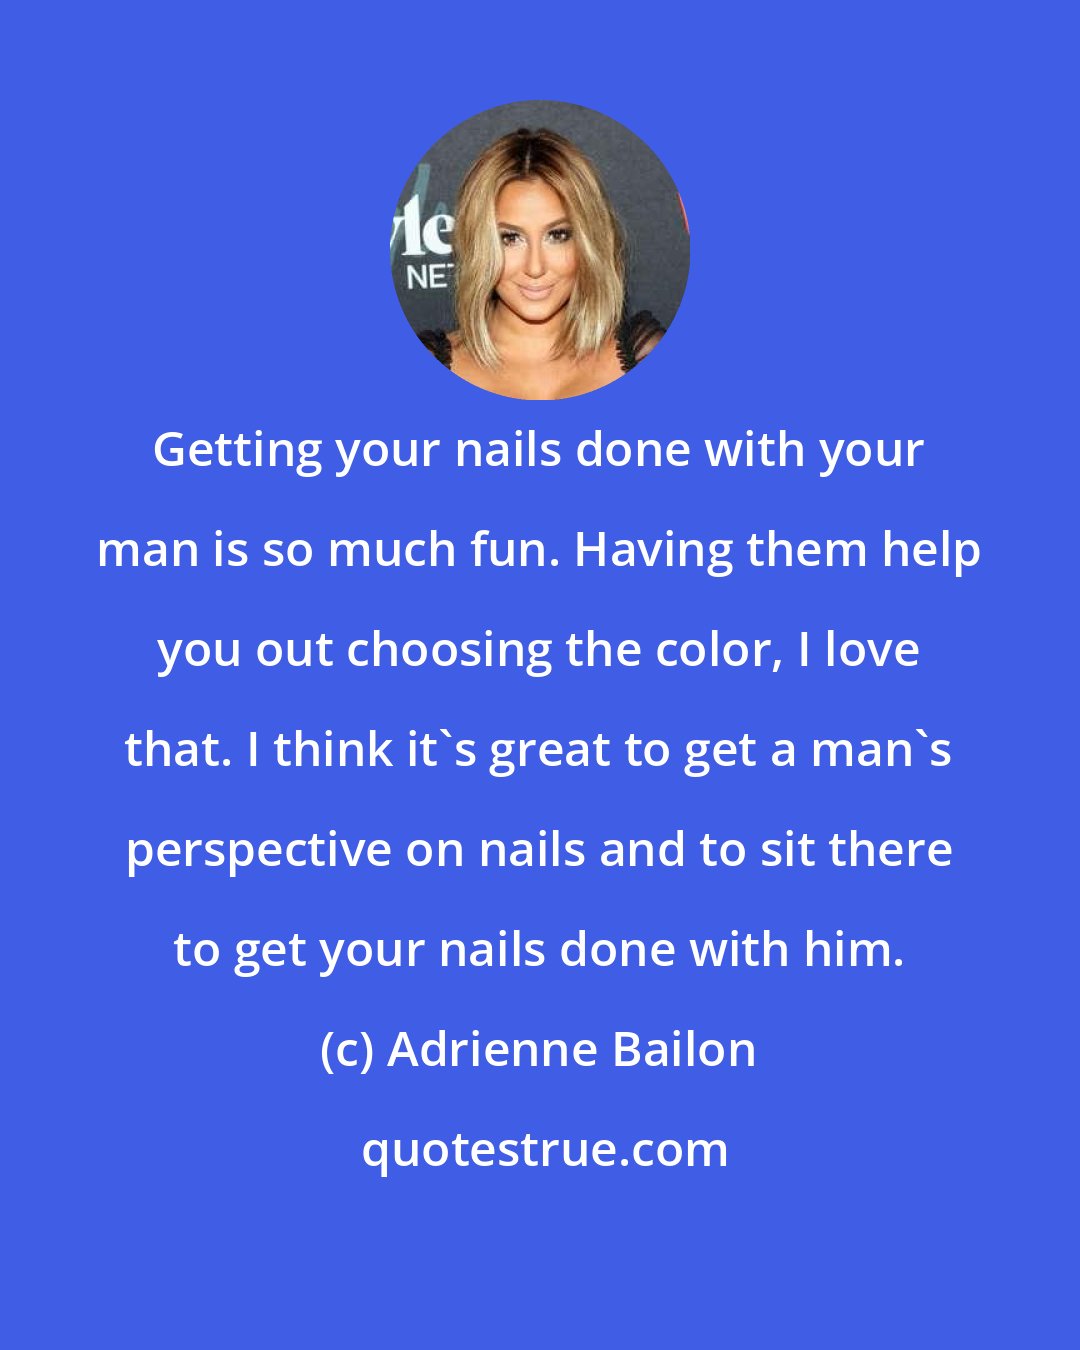 Adrienne Bailon: Getting your nails done with your man is so much fun. Having them help you out choosing the color, I love that. I think it's great to get a man's perspective on nails and to sit there to get your nails done with him.